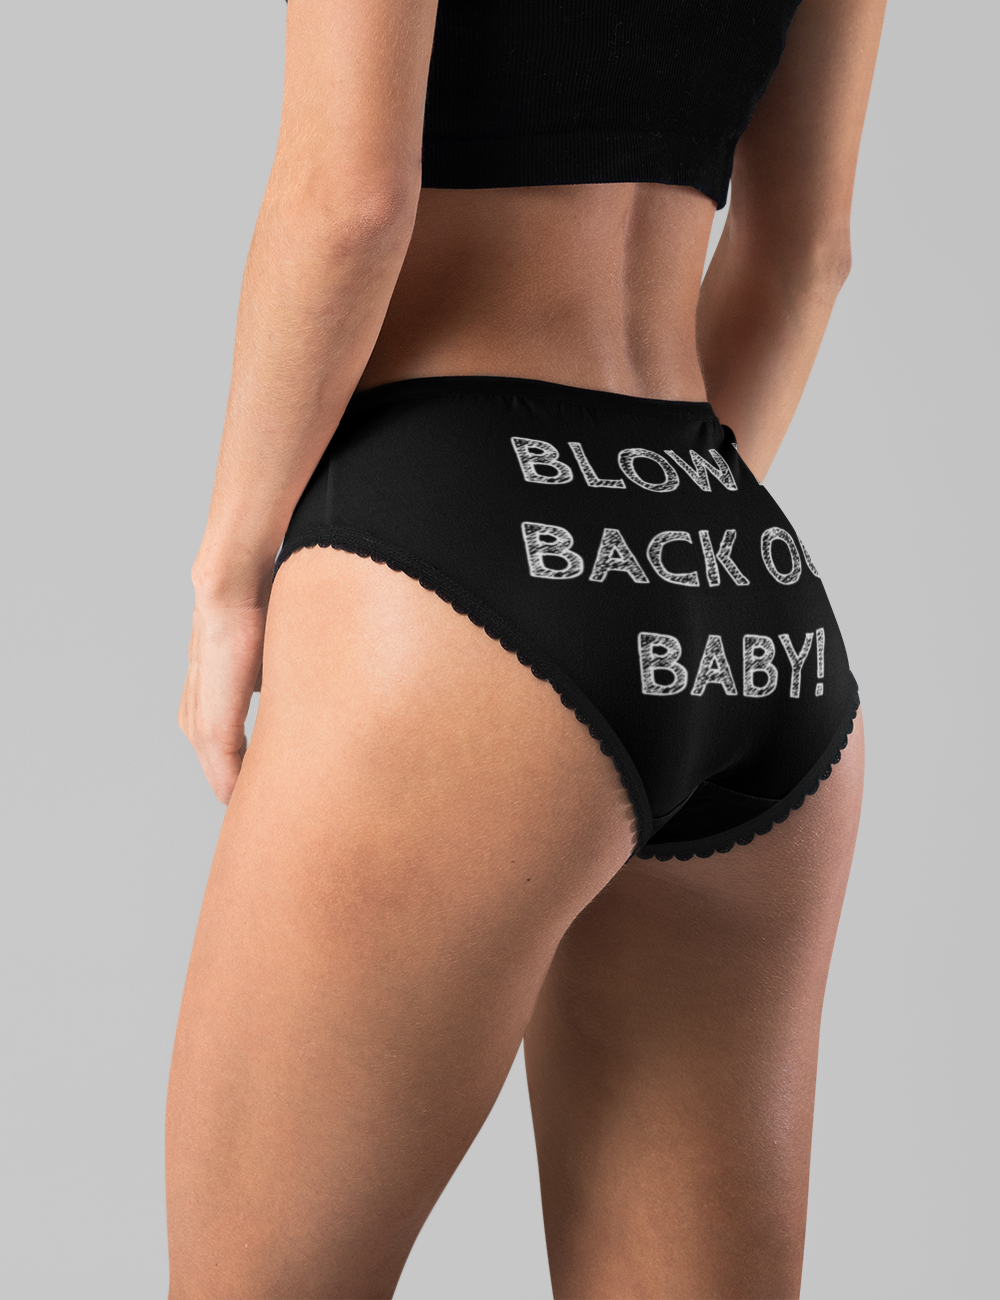 Blow My Back Out Baby Women's Intimate Briefs OniTakai